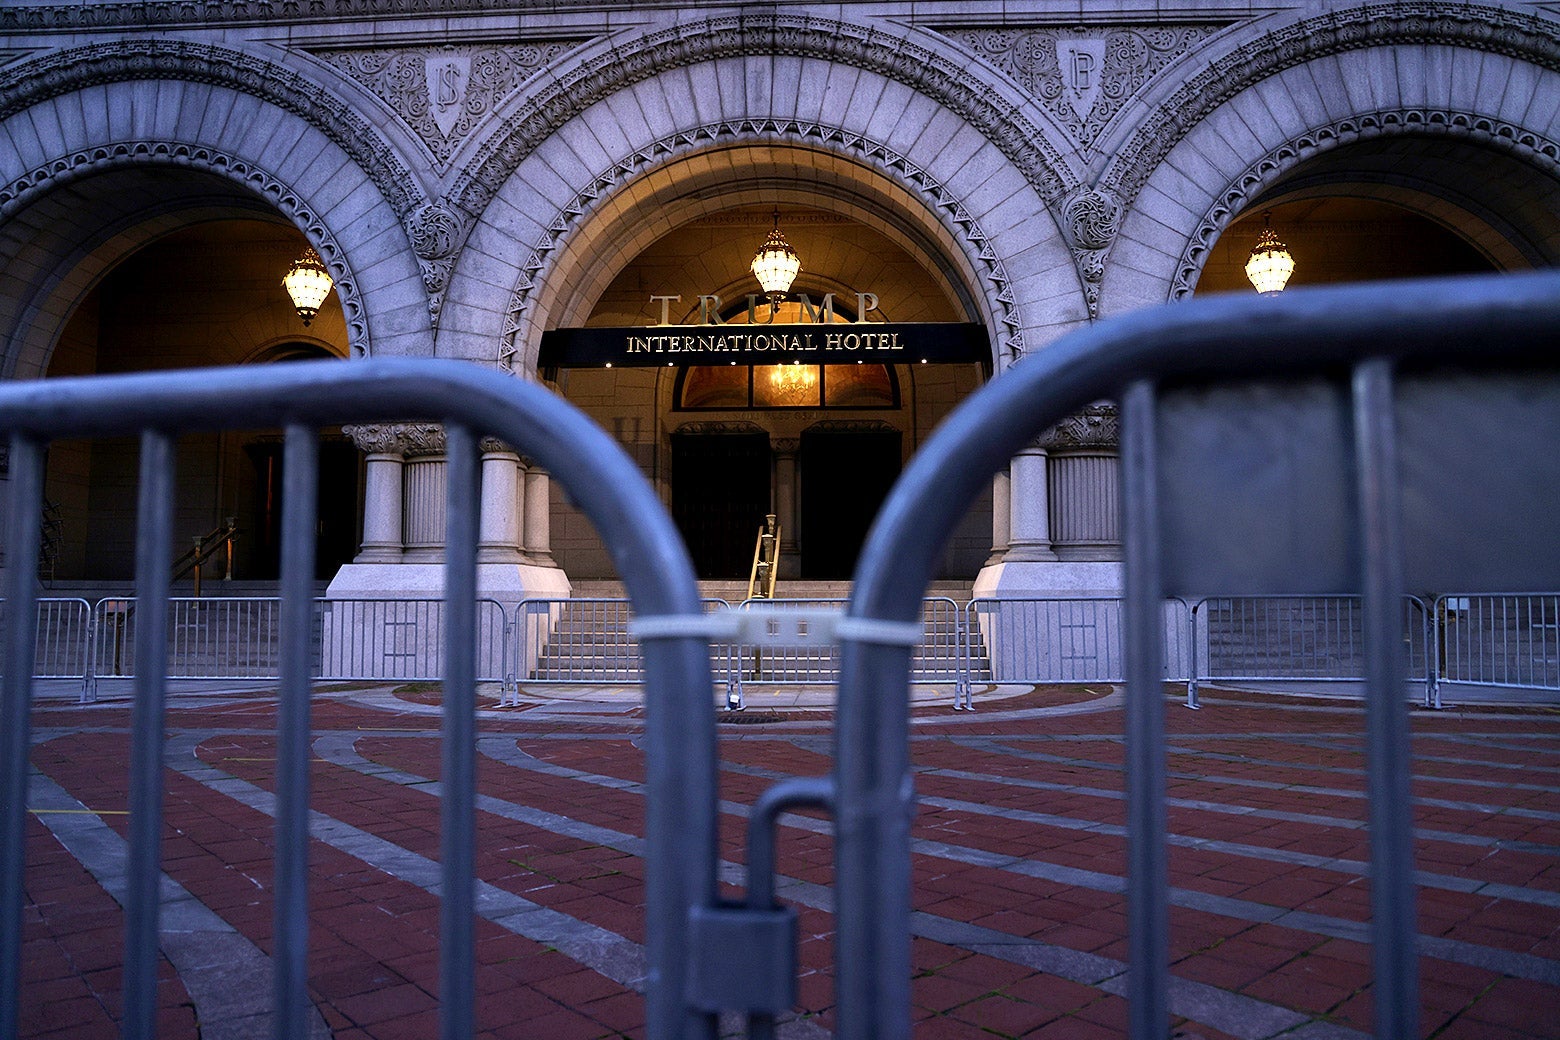 An entrance of the Trump International Hotel is blocked in the morning hours of Nov. 4, 2020 in Washington, D.C.